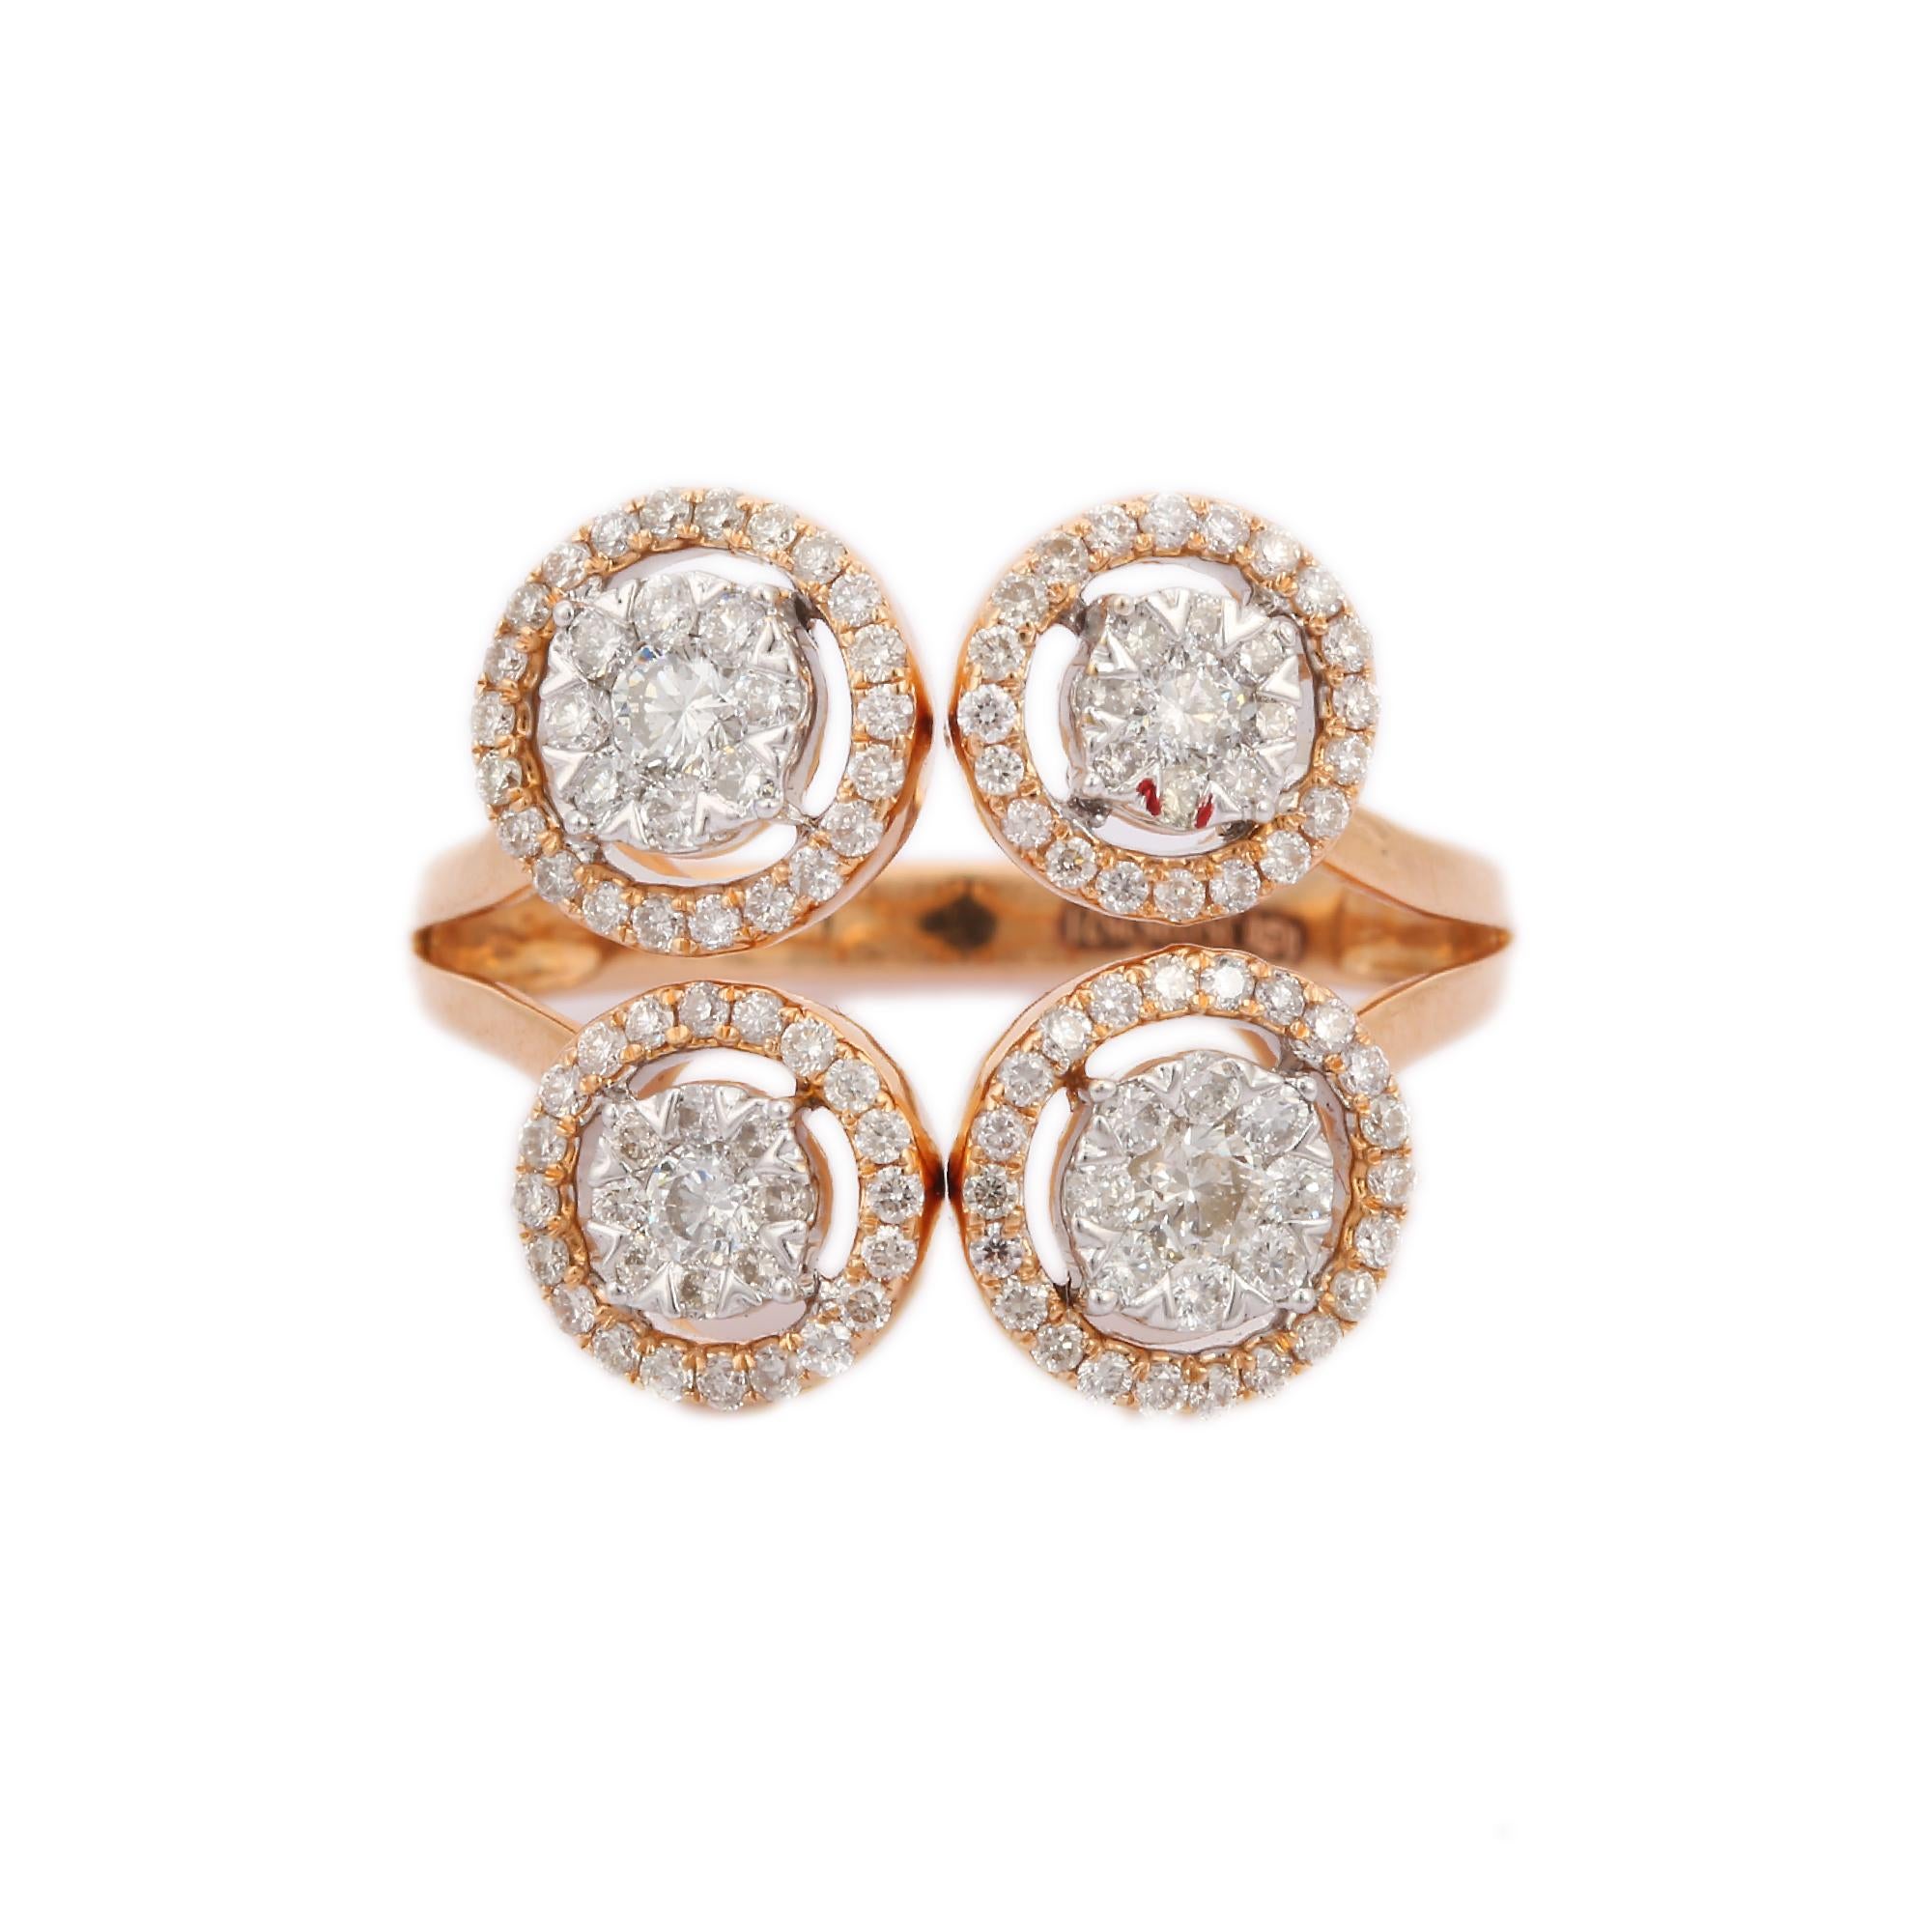 For Sale:  Statement Illusion Diamond Wedding Cluster Ring in 18K Solid Rose Gold 3